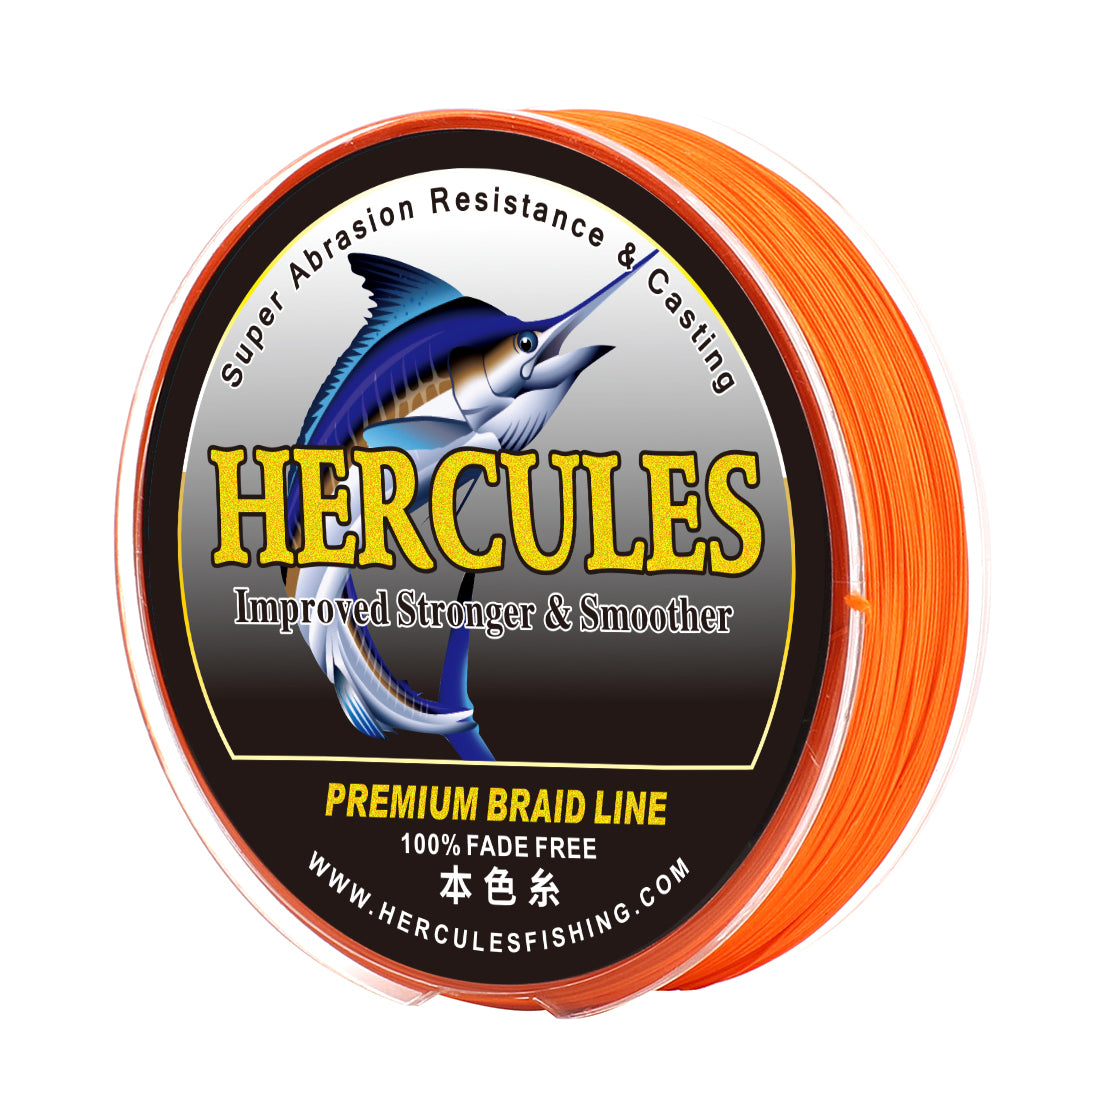 HERCULES Braided Fishing Line for Her, Abrasion India, hercules